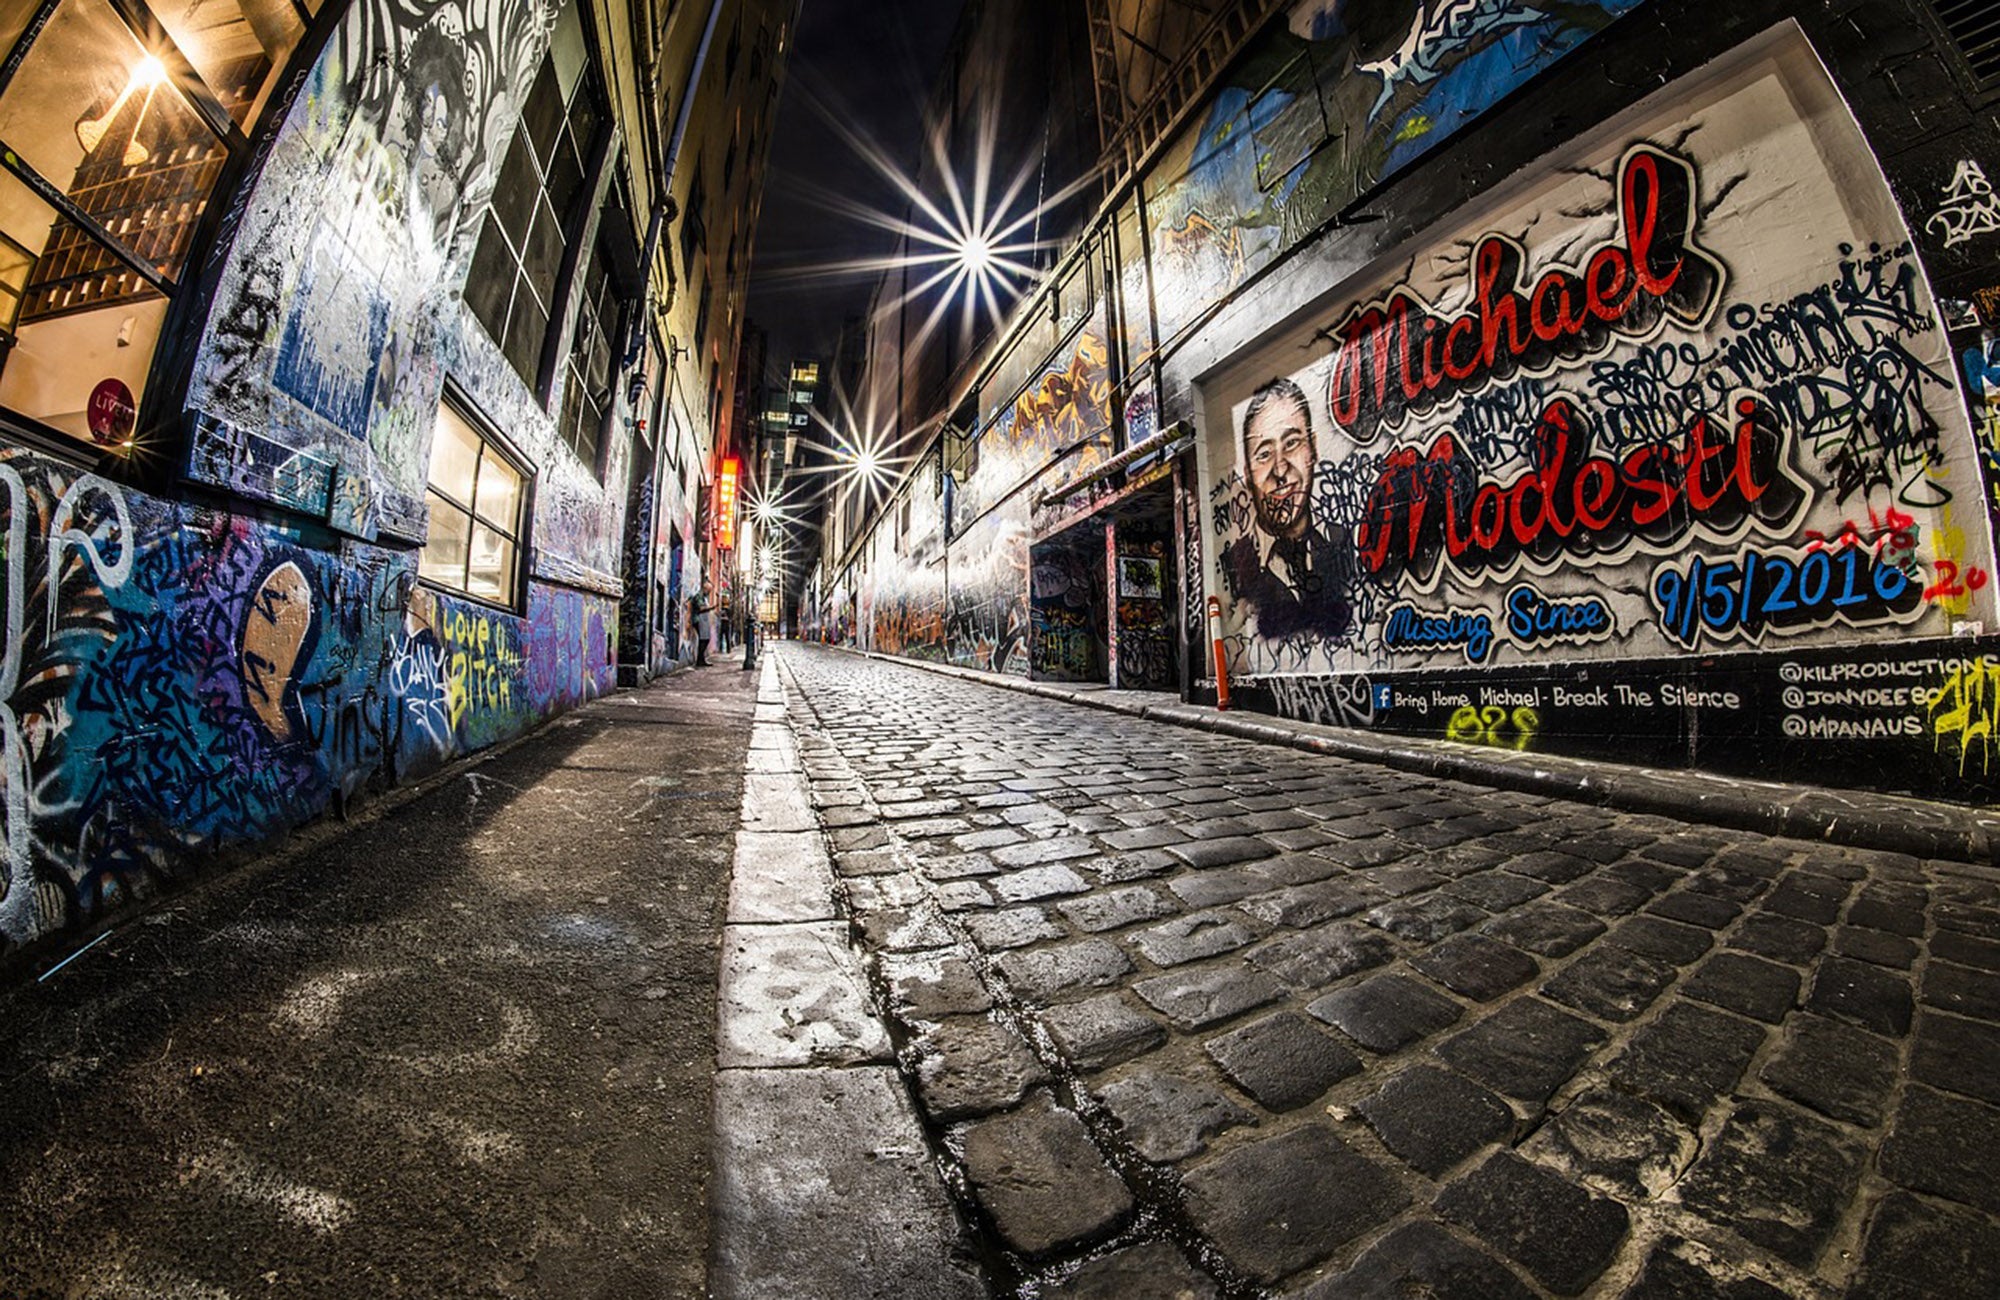 Wet laneway in Melbourne with graffiti on walls